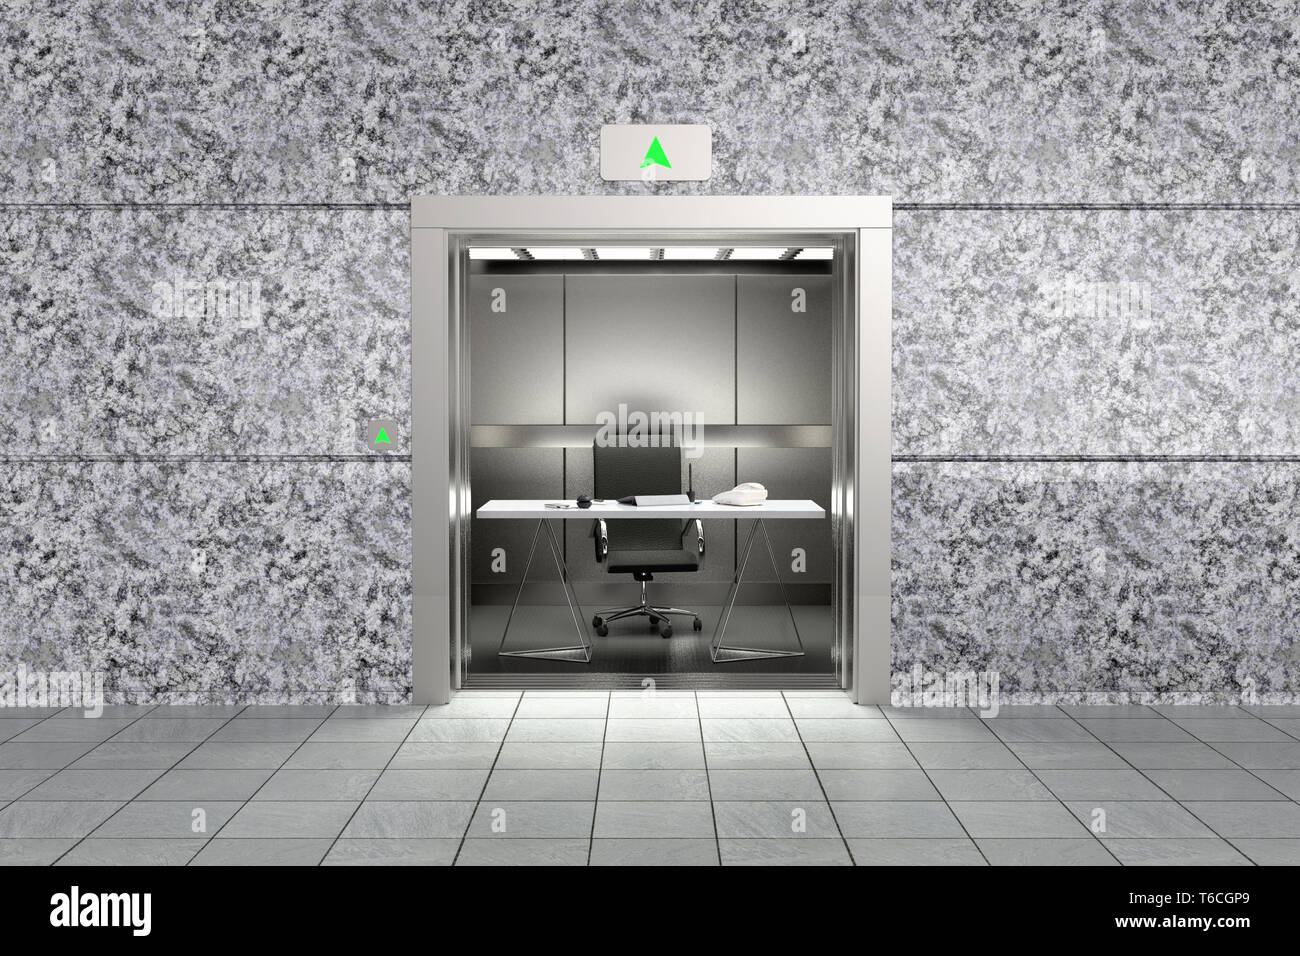 3D rendering of a conceptual image representing proffessional sucess with an office inside an elevator going up Stock Photo